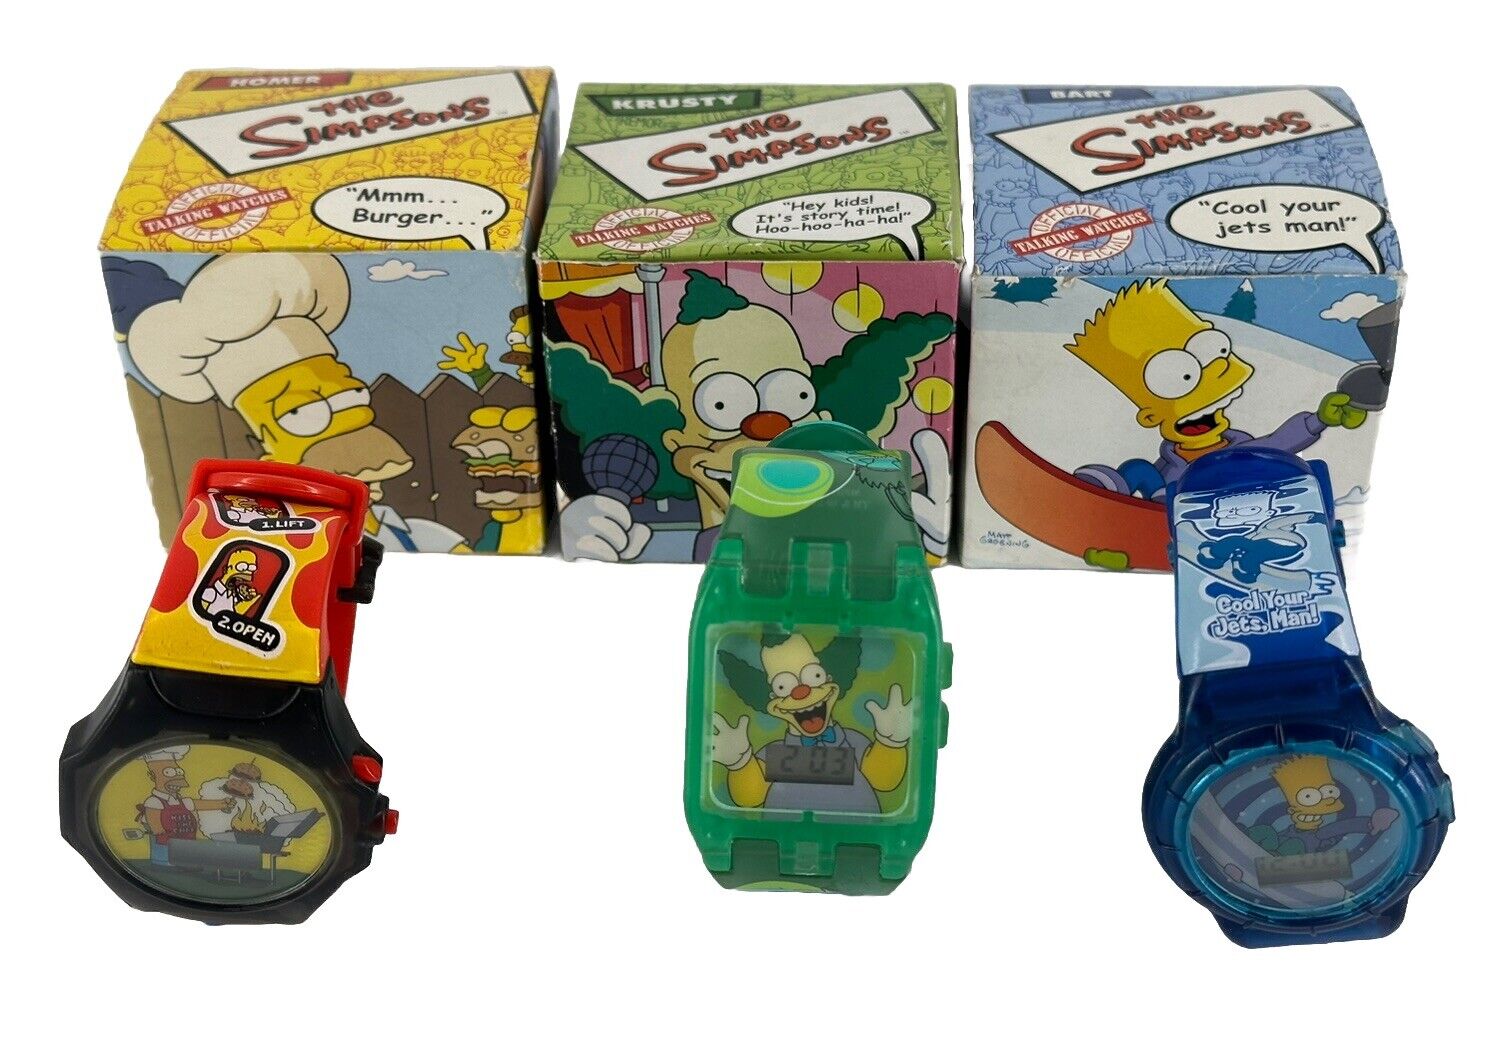 The Simpsons - talking watches 2002 SET OF 3 - Burger King collectible Read Desc